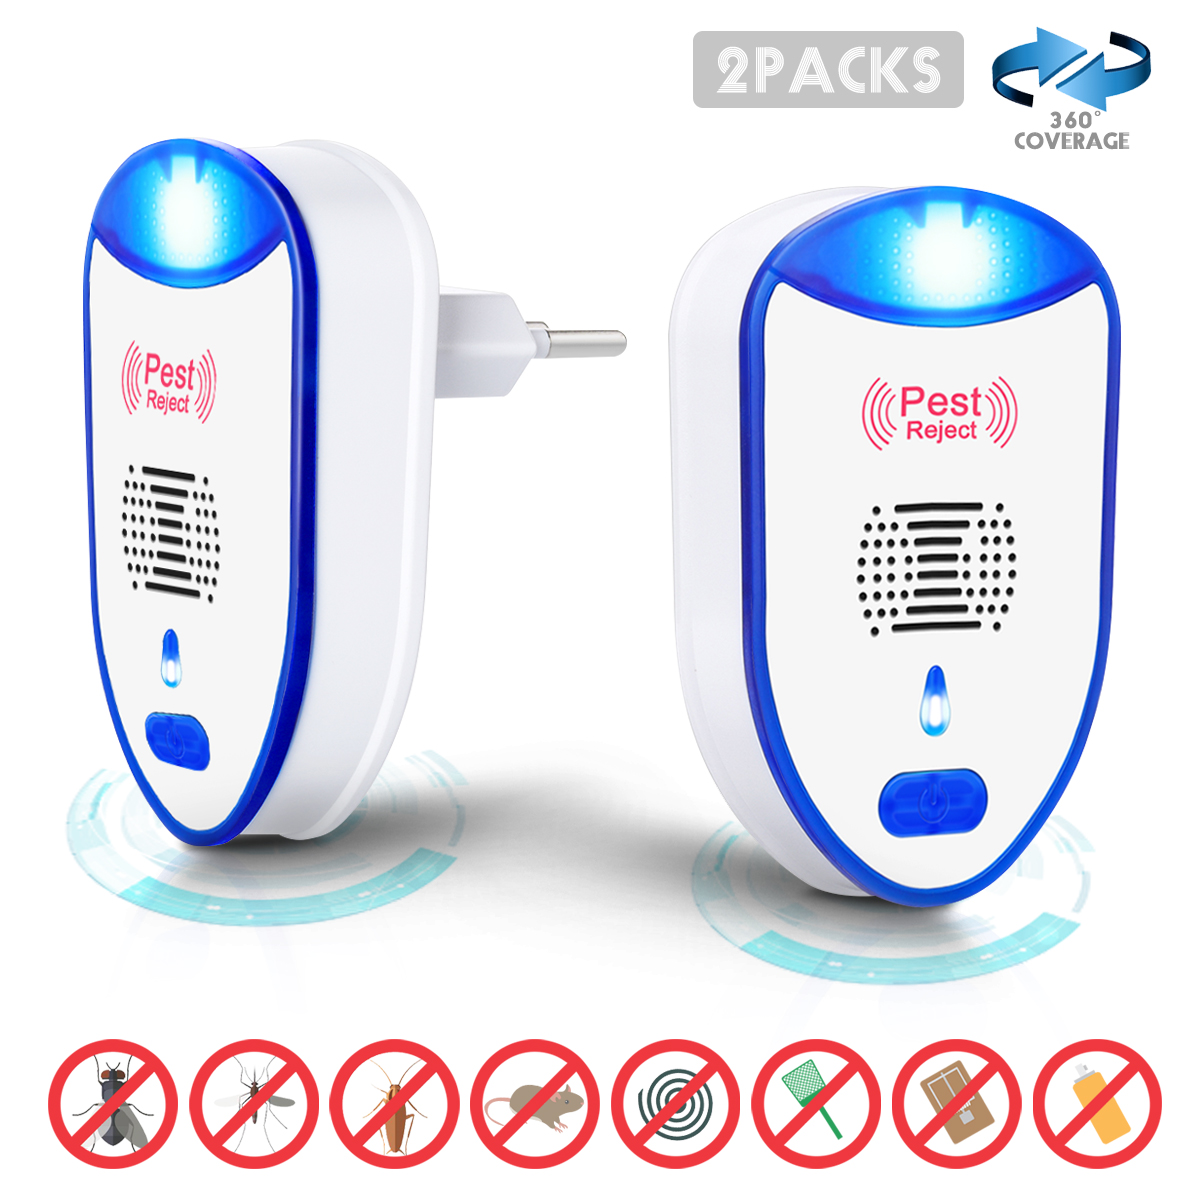 2PCS-Multi-functional-Mosquito-Repeller-Inverter-Ultrasonic-Mouse-Repeller-Indoor-and-Outdoor-Insect-1891780-2